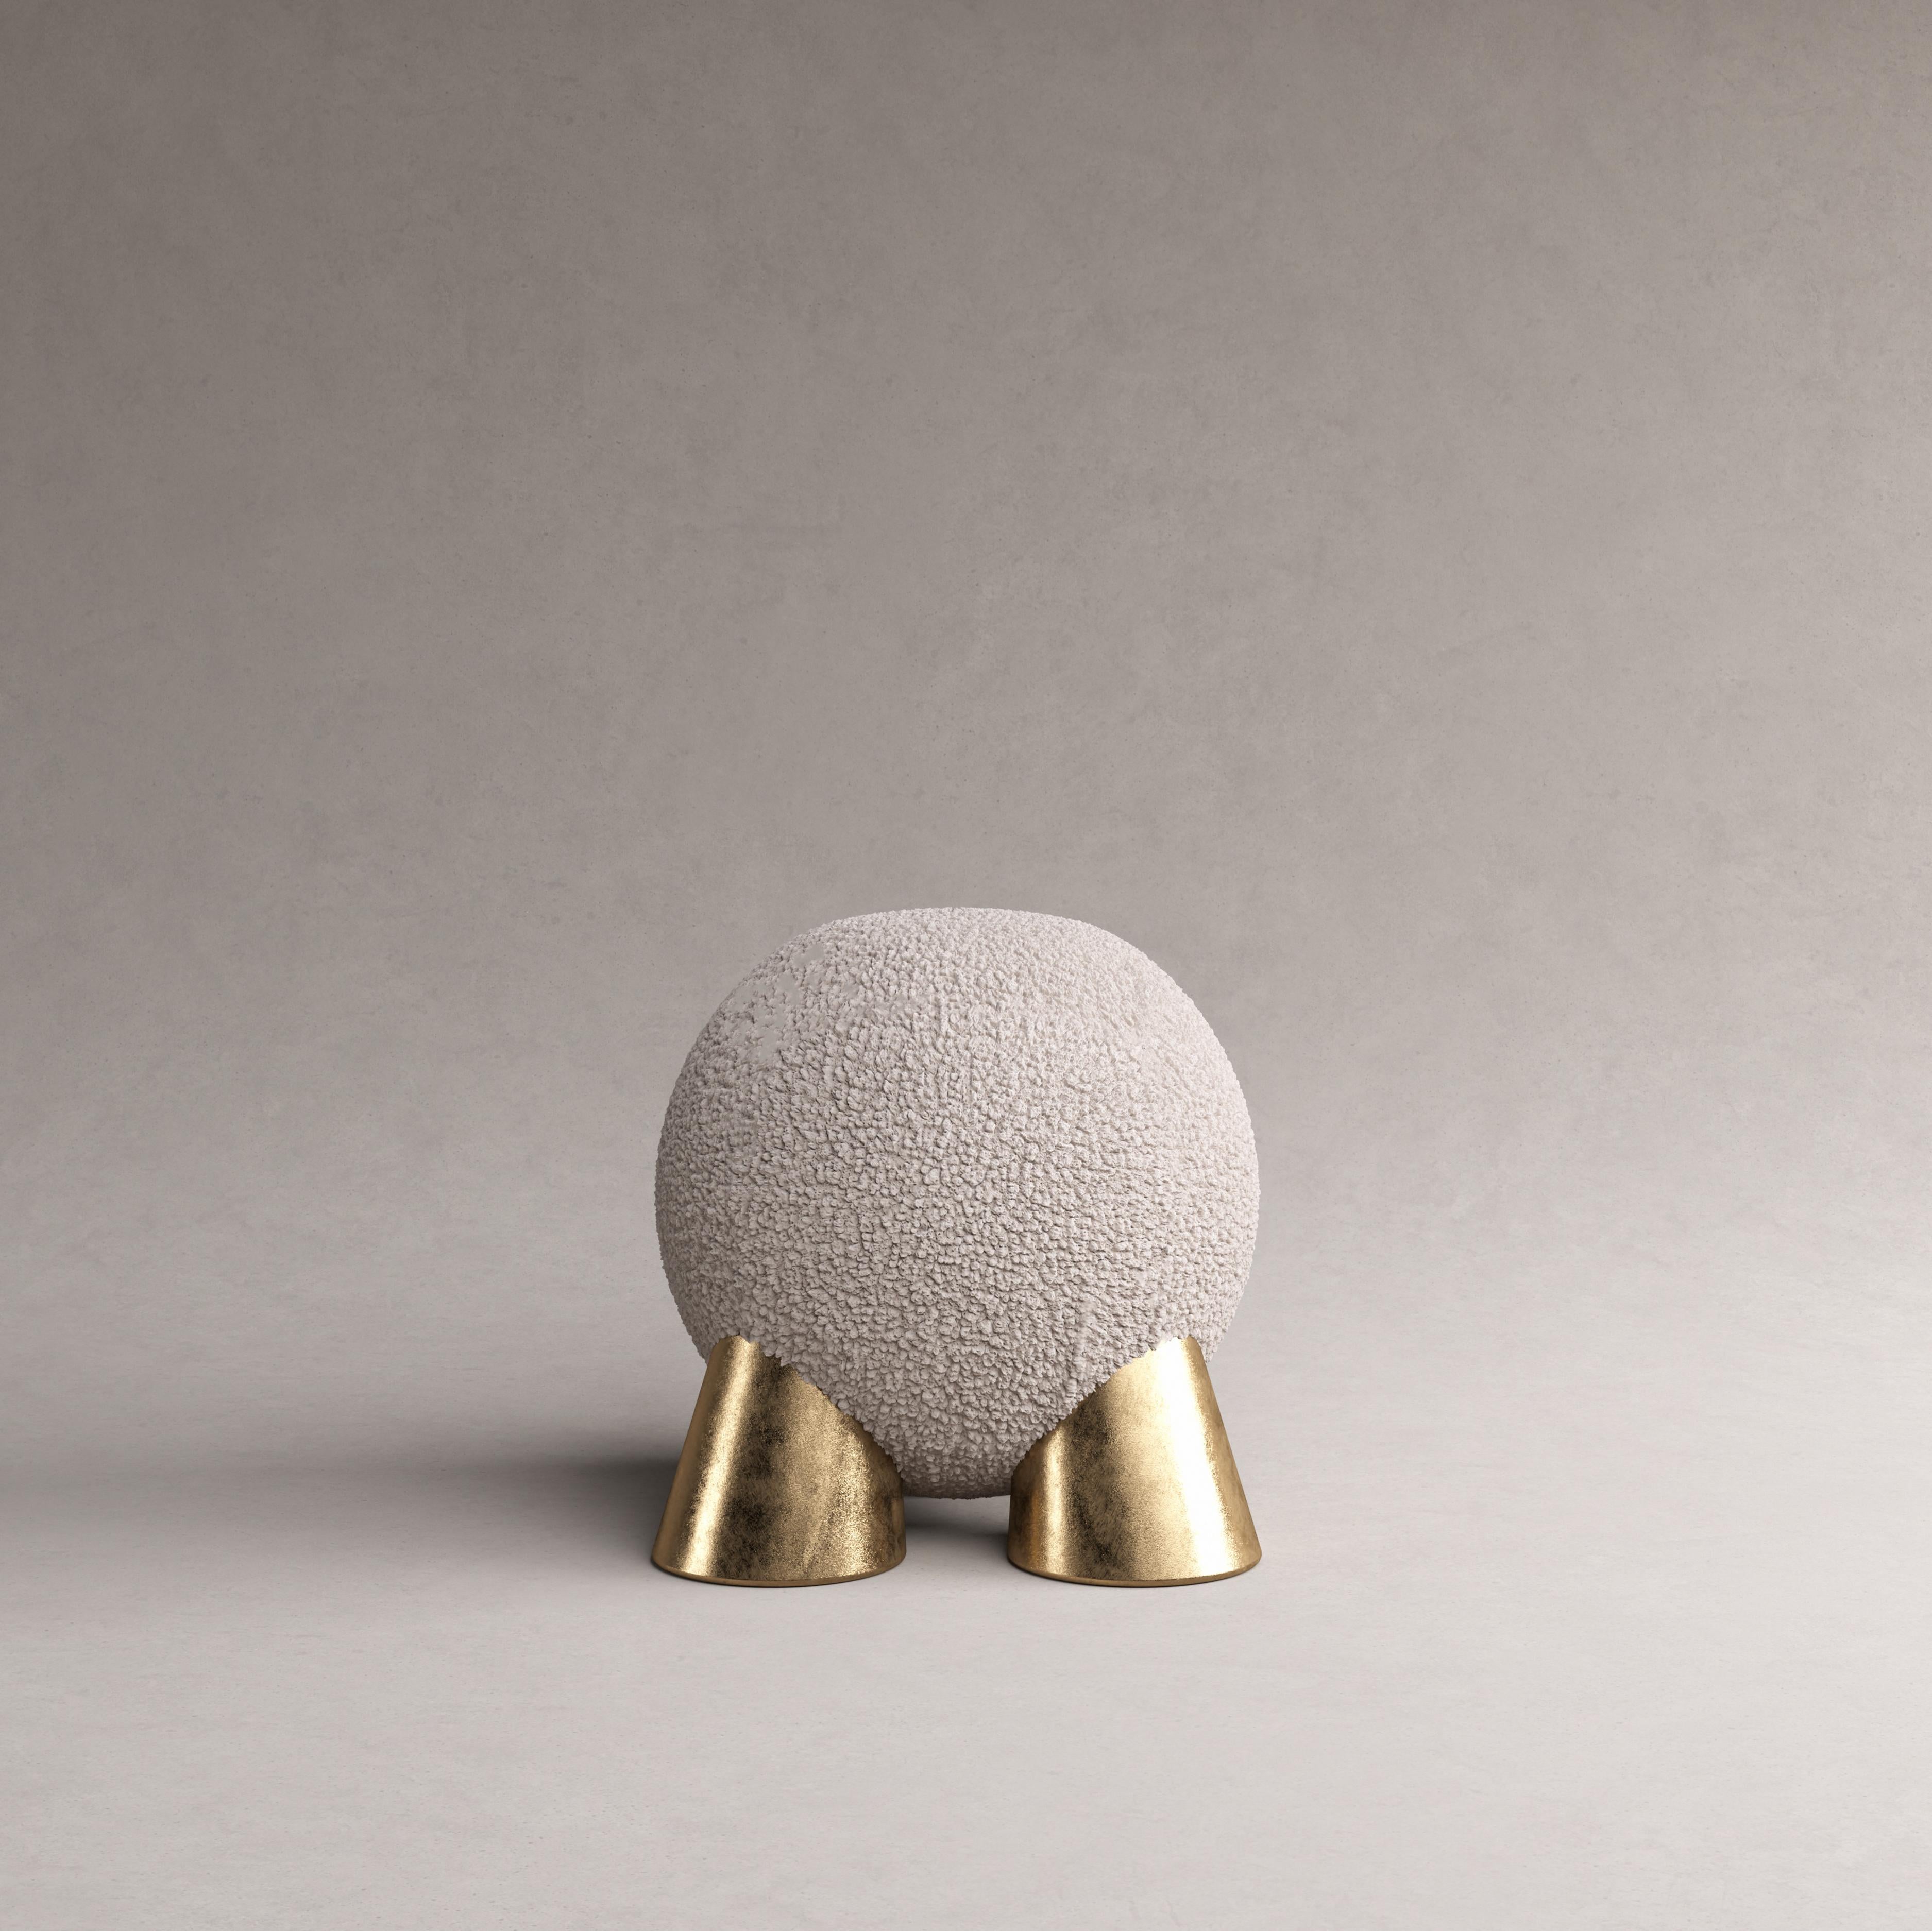 Atlas stool by Pietro Franceschini
Sold exclusively by Galerie Philia
Manufacturer: Stefano Minotti
Dimensions: W 49 x H 52 cm
Materials: Lamb, gold leaf
Available materials: Lamb, gold leaf/cast brass

Pietro Franceschini is an architect and